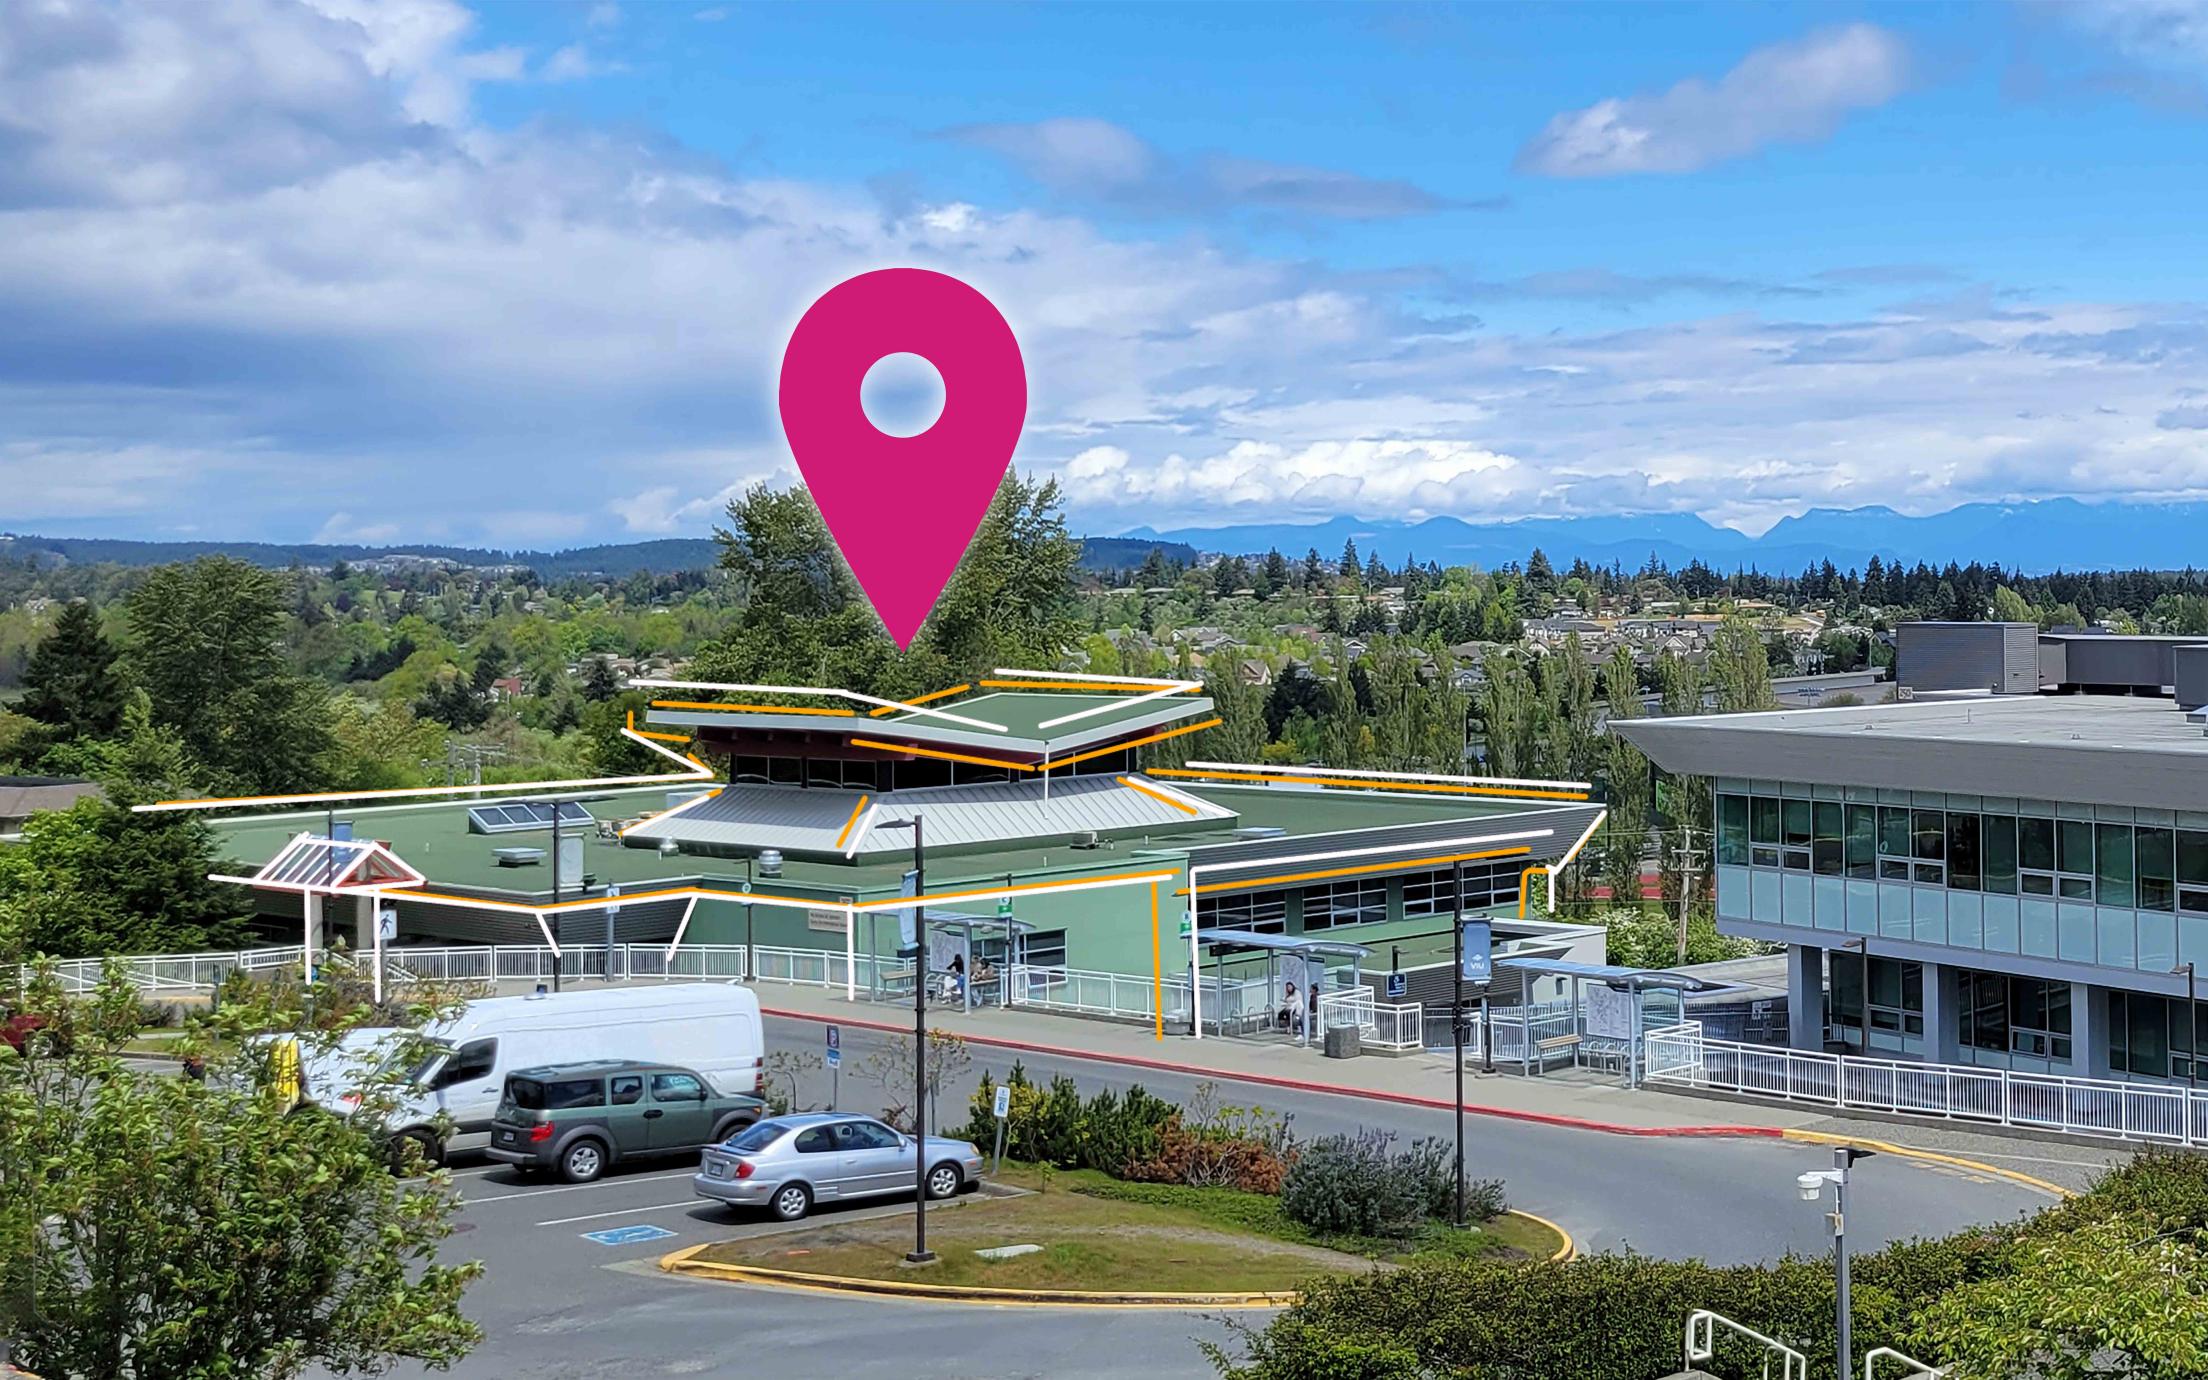 VIU Nanaimo campus, buildings 250 and 255. Location marker above building 255 to indicate Career Studio location.